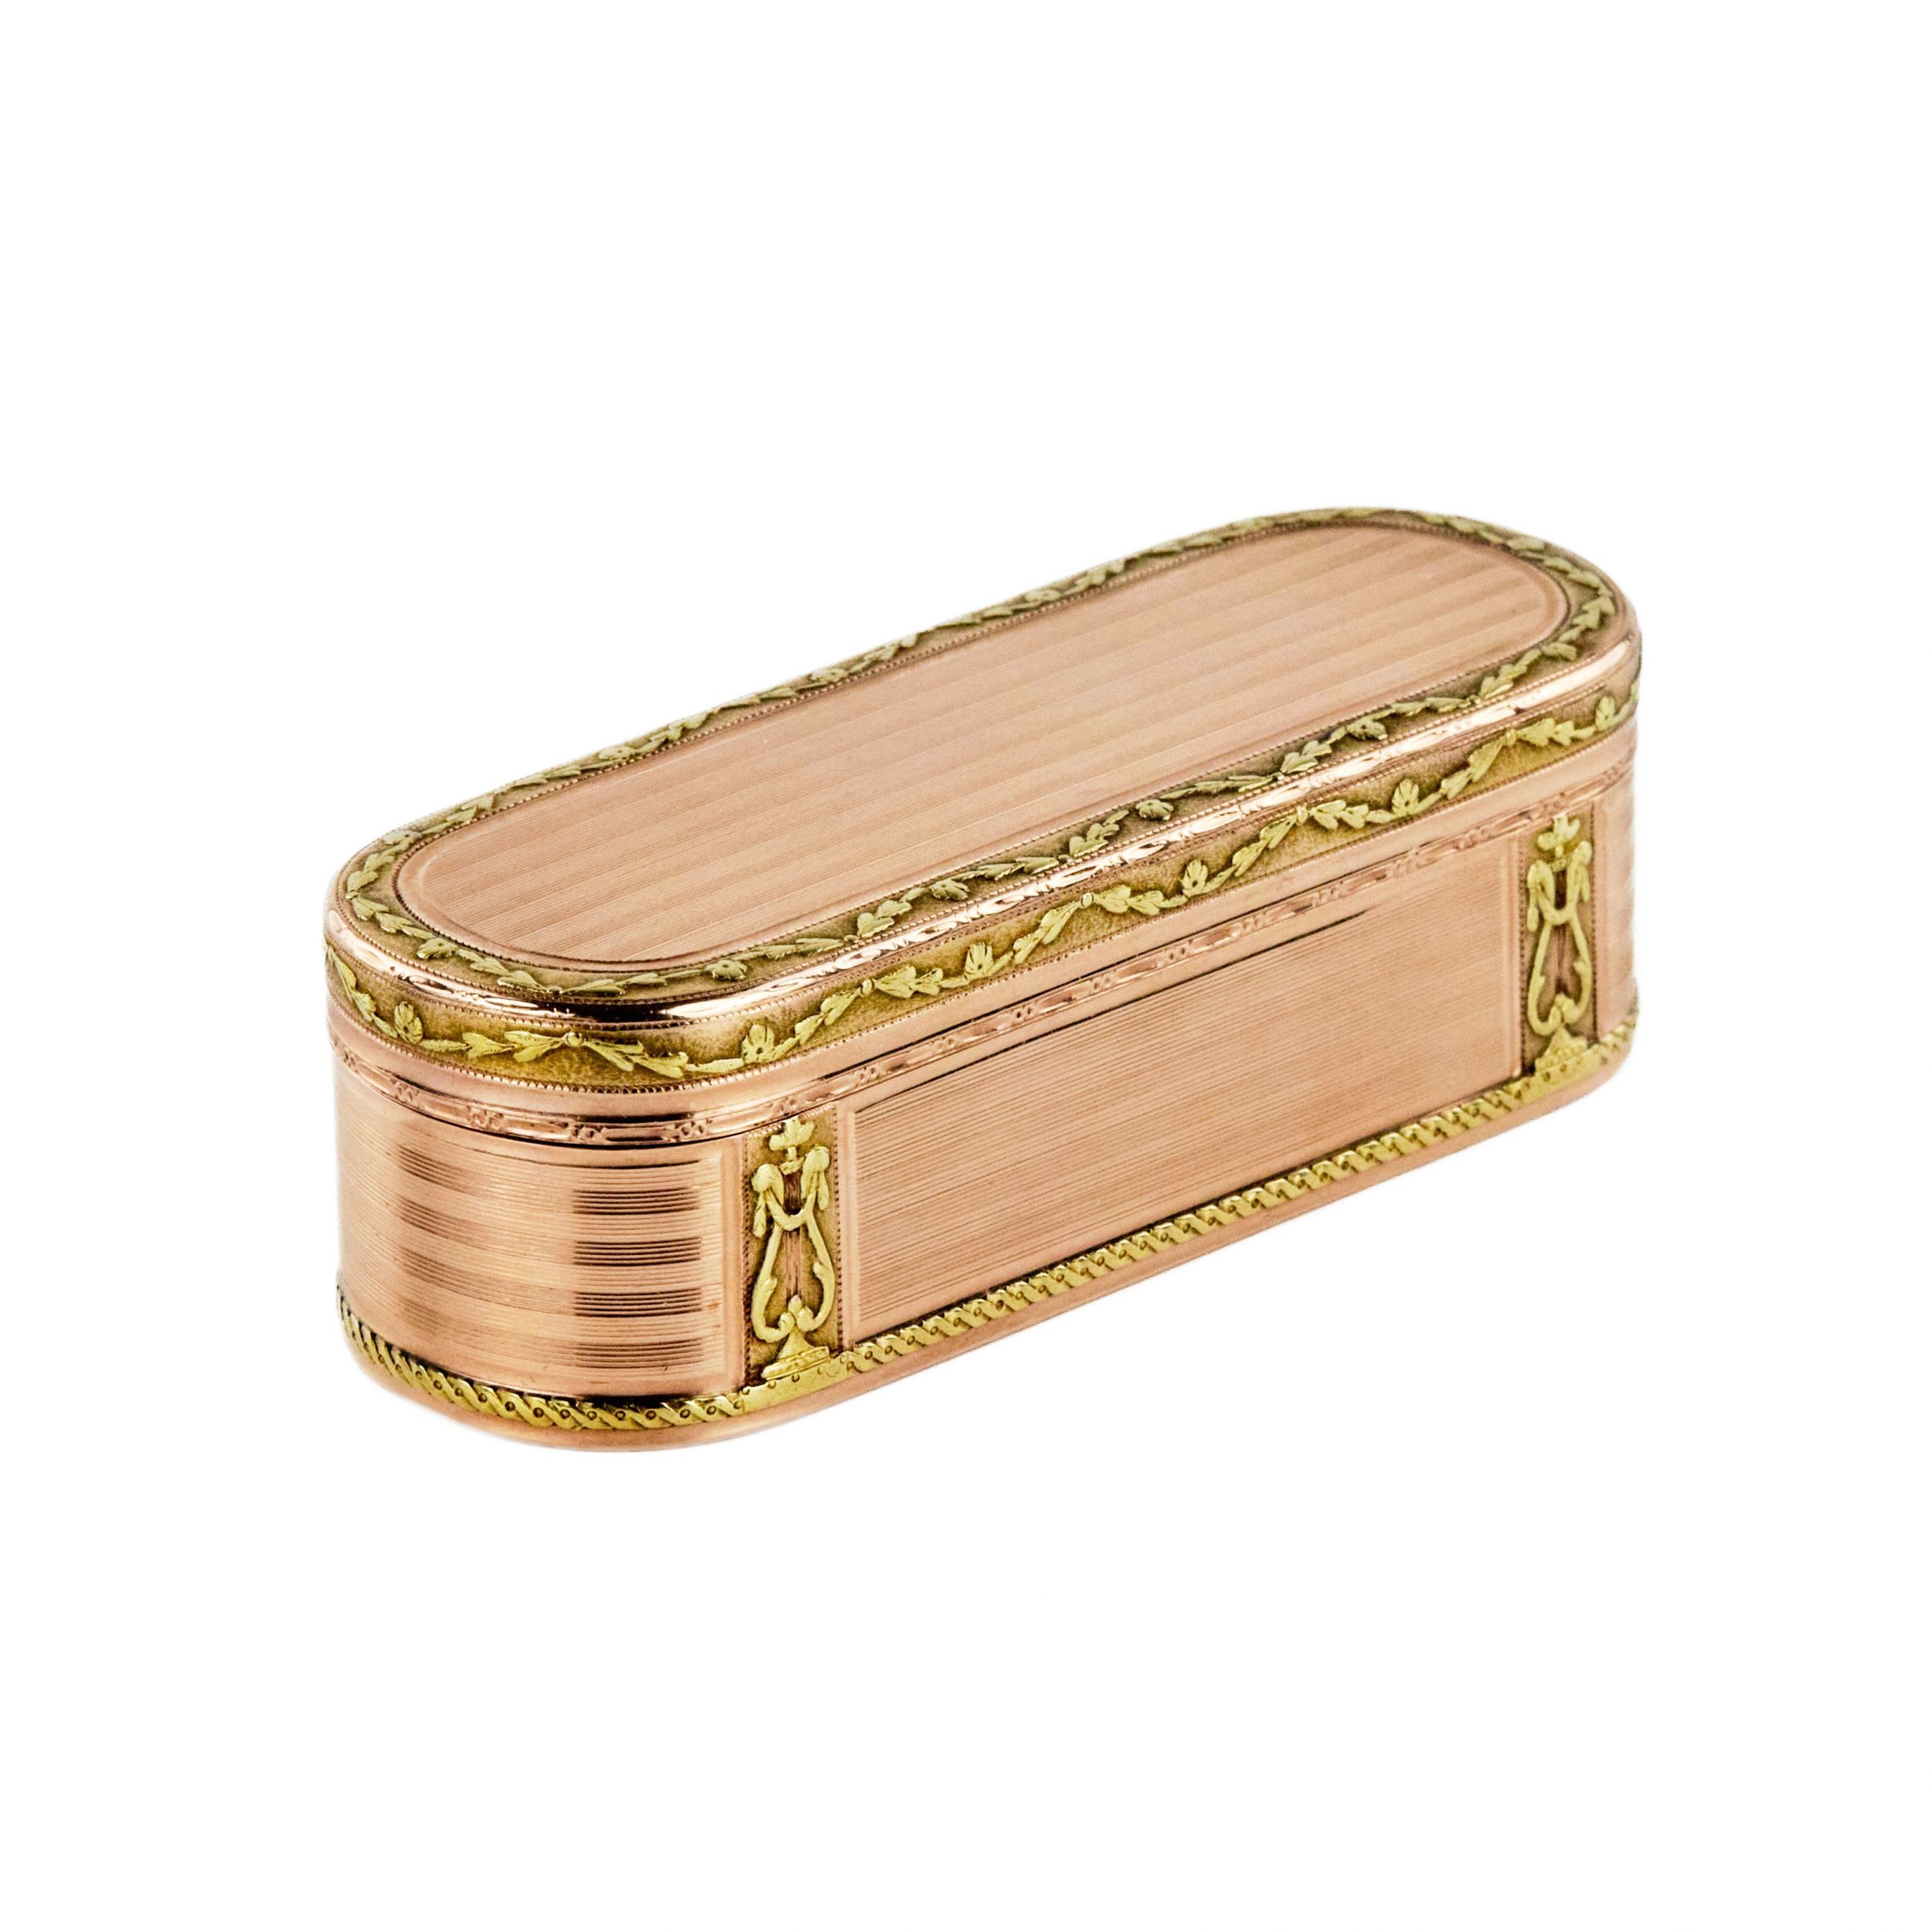 Snuffbox-in-two-tone-gold-France-The-turn-of-the-19th-20th-centuries-